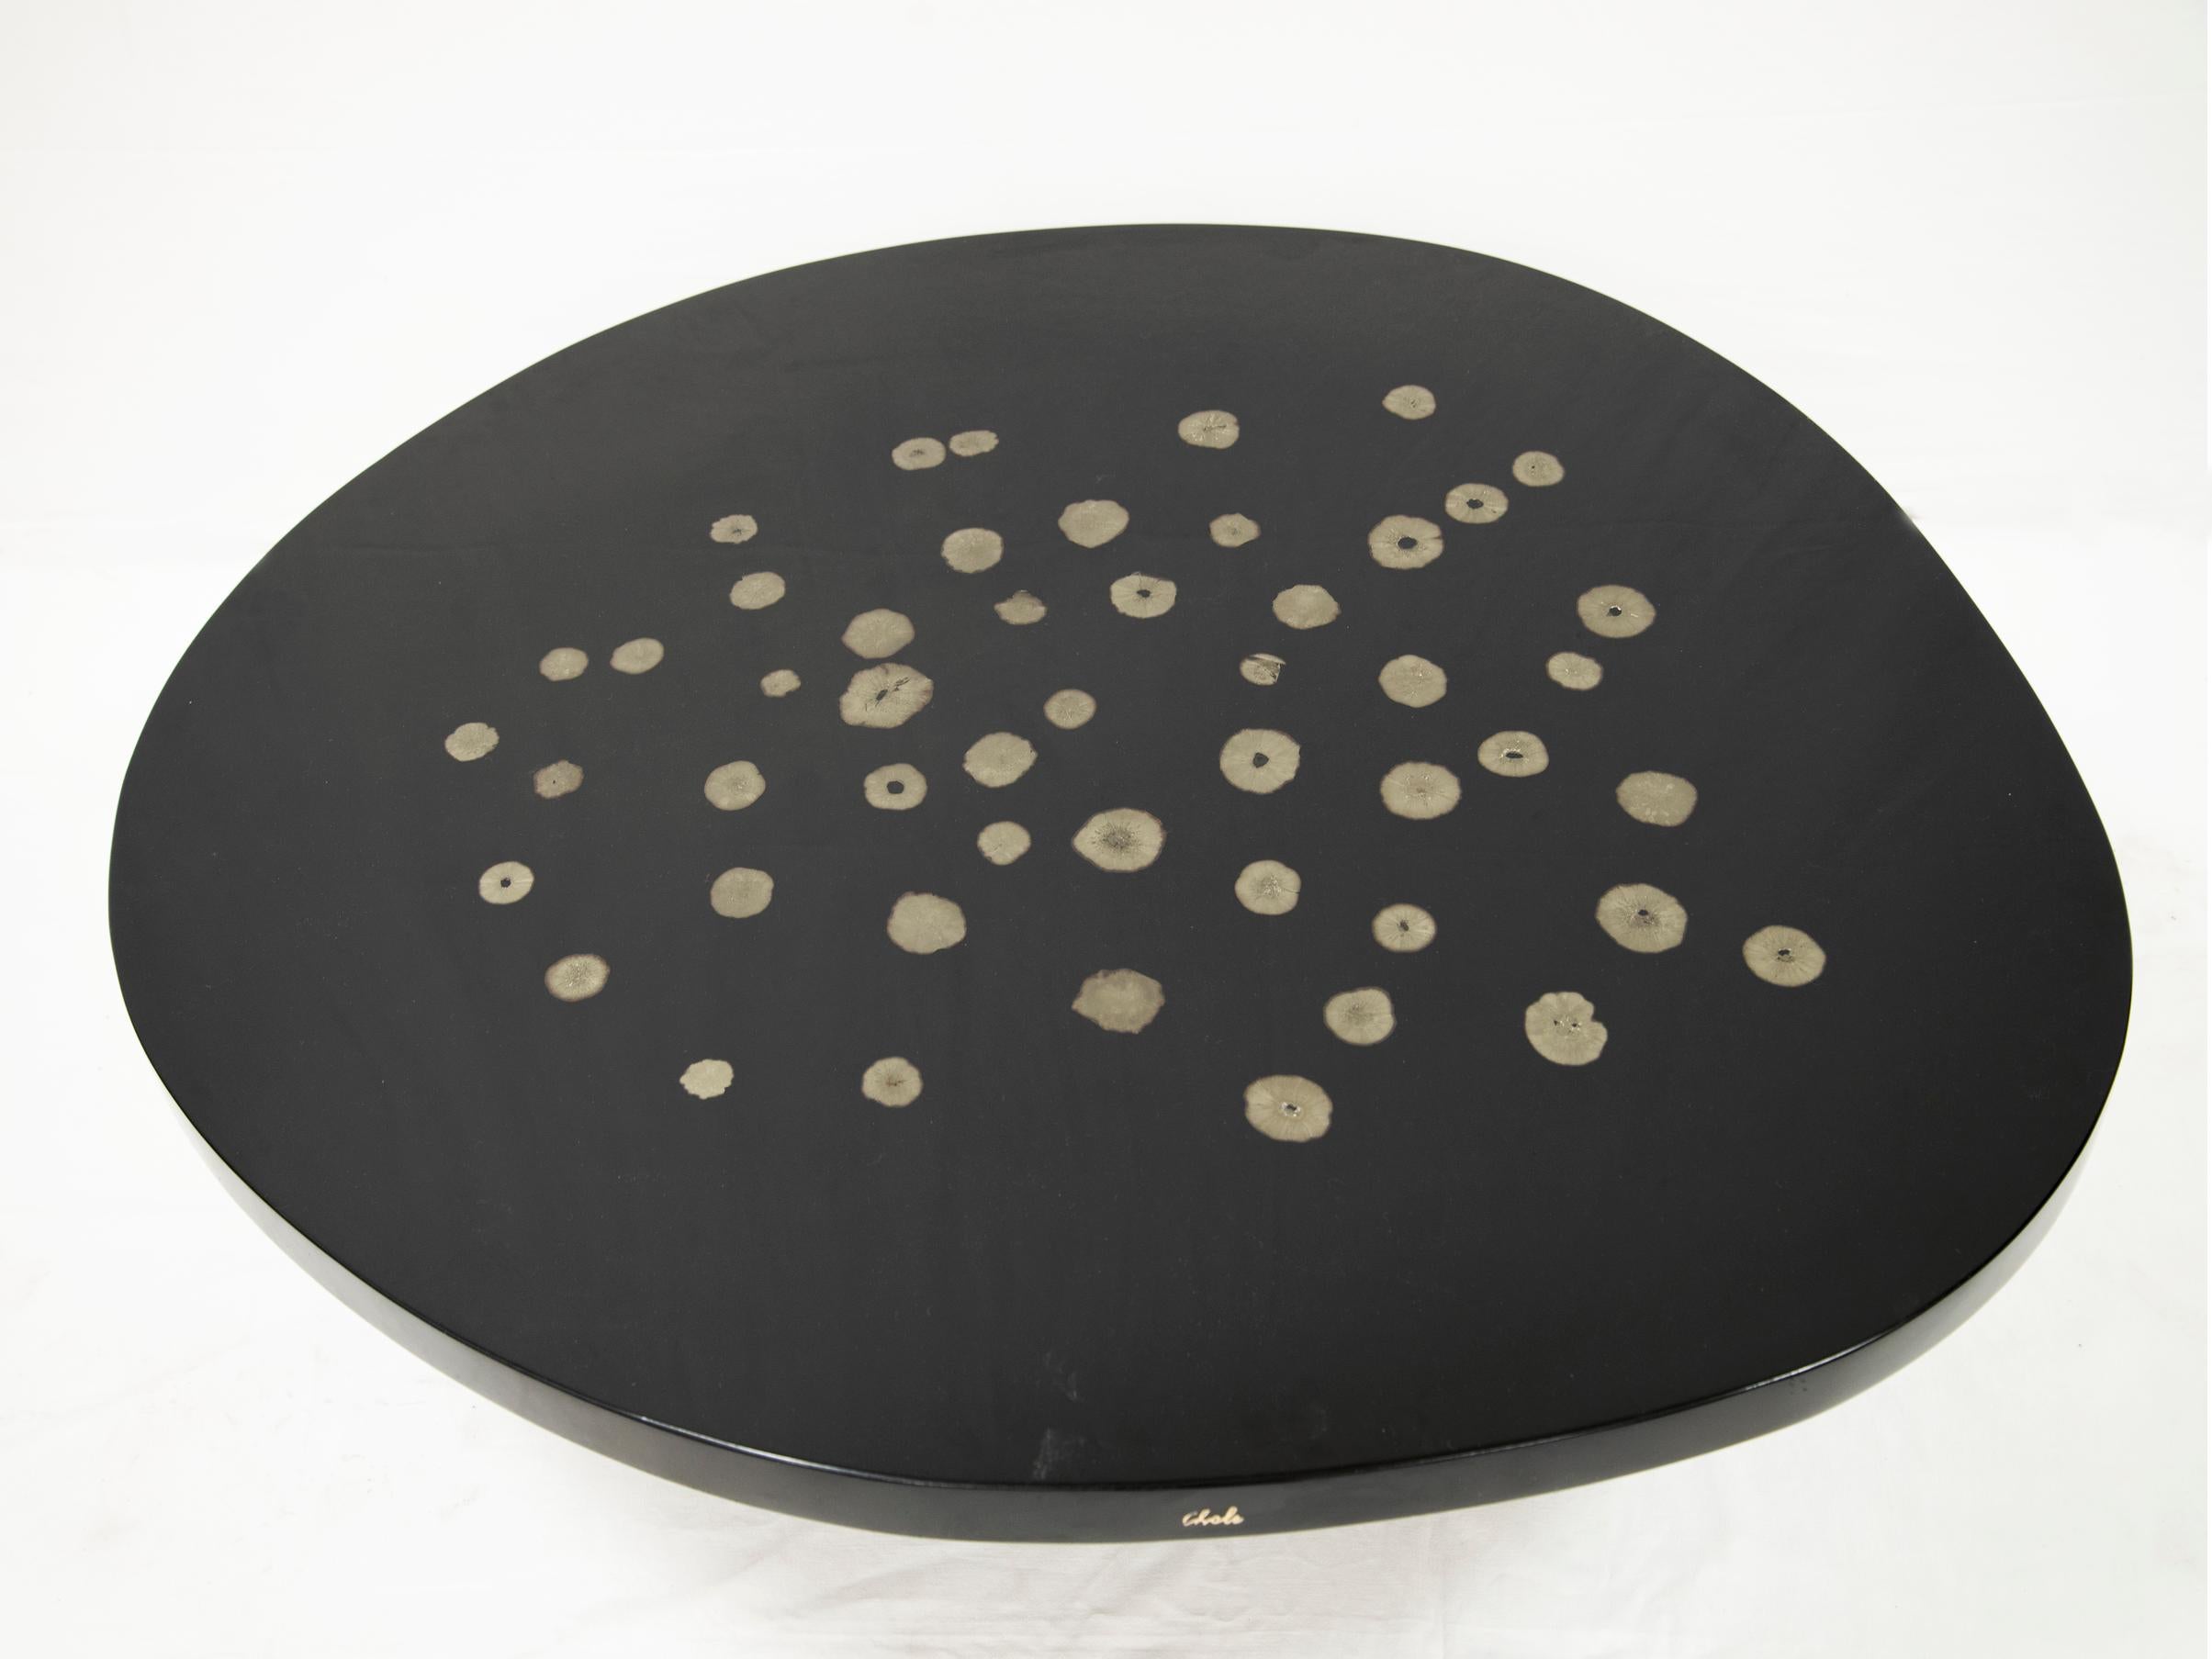 Ado Chale
Coffee table
Resin, inclusion of marcassite gemstones, feet in lacquered steel
Belgium, circa 1970
Signed
Measures: H 34 x W 113 x D 100 cm.